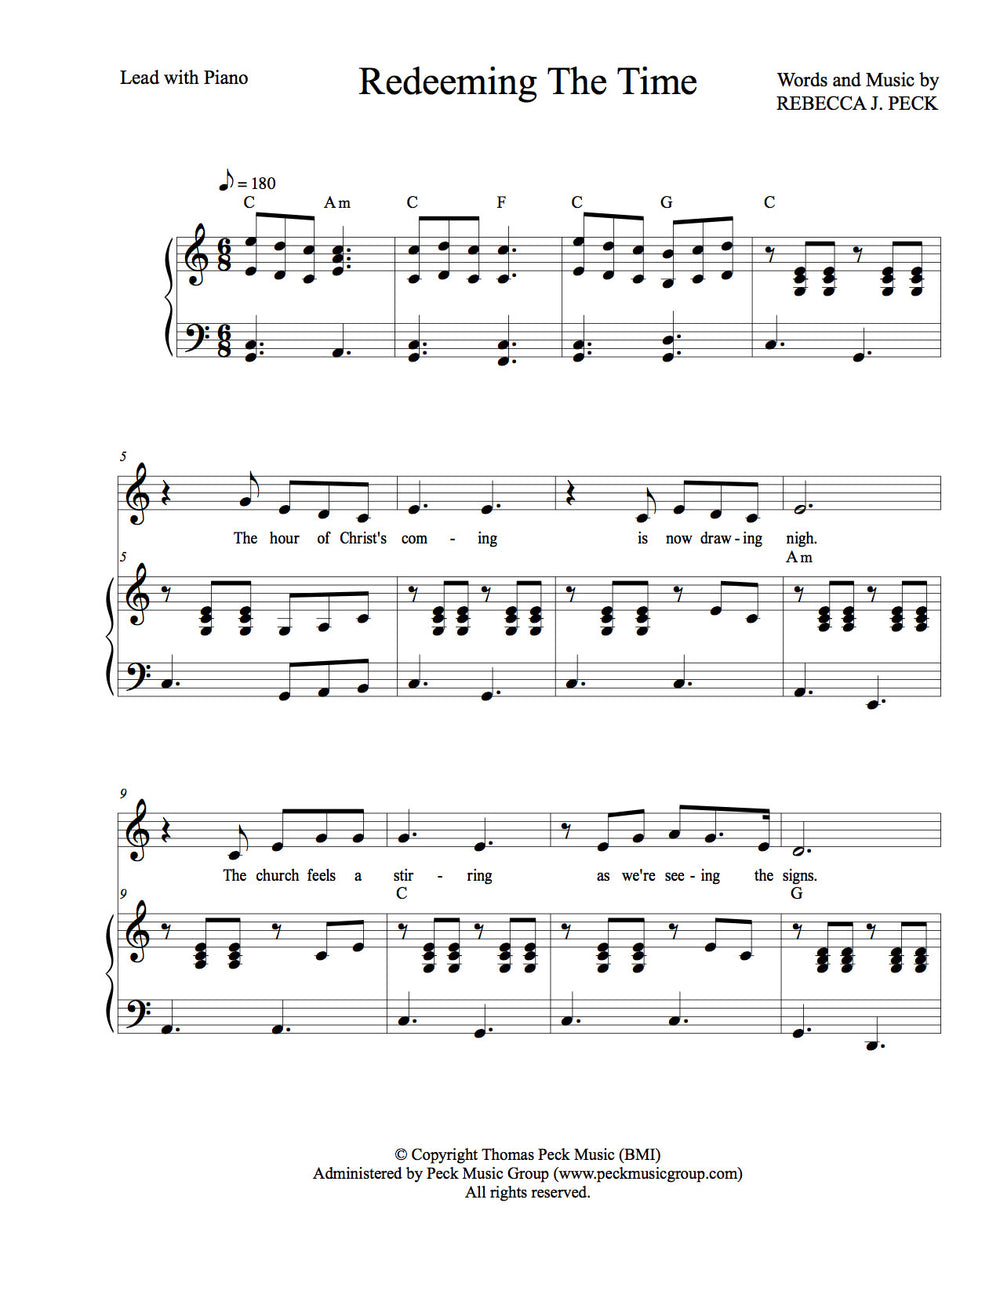 Redeeming The Time - sheet music - Digitally Delivered PDF